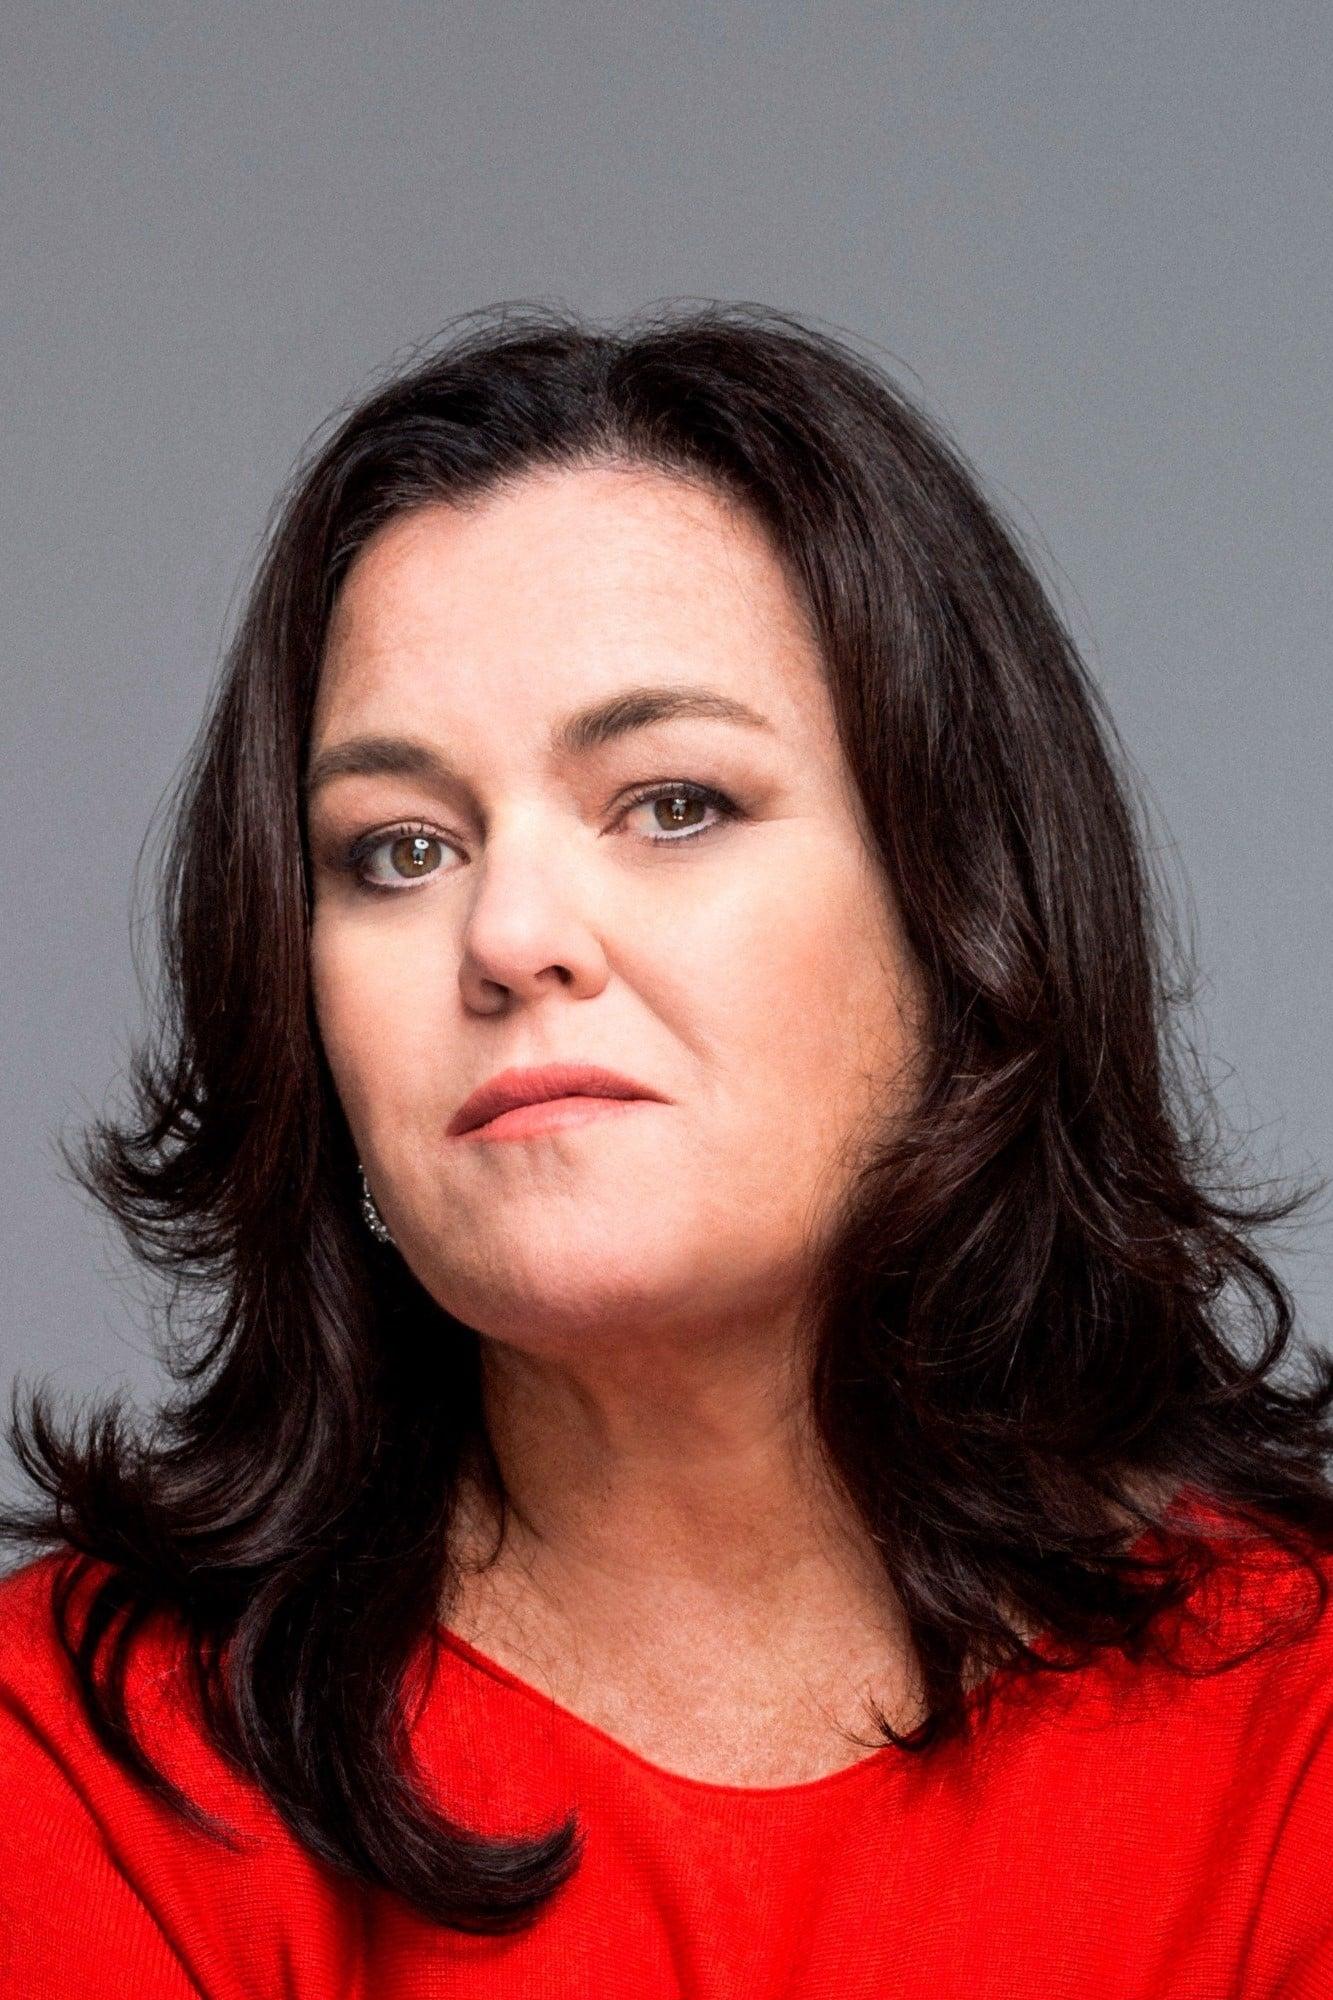 Rosie O'Donnell | Gina Barrisano